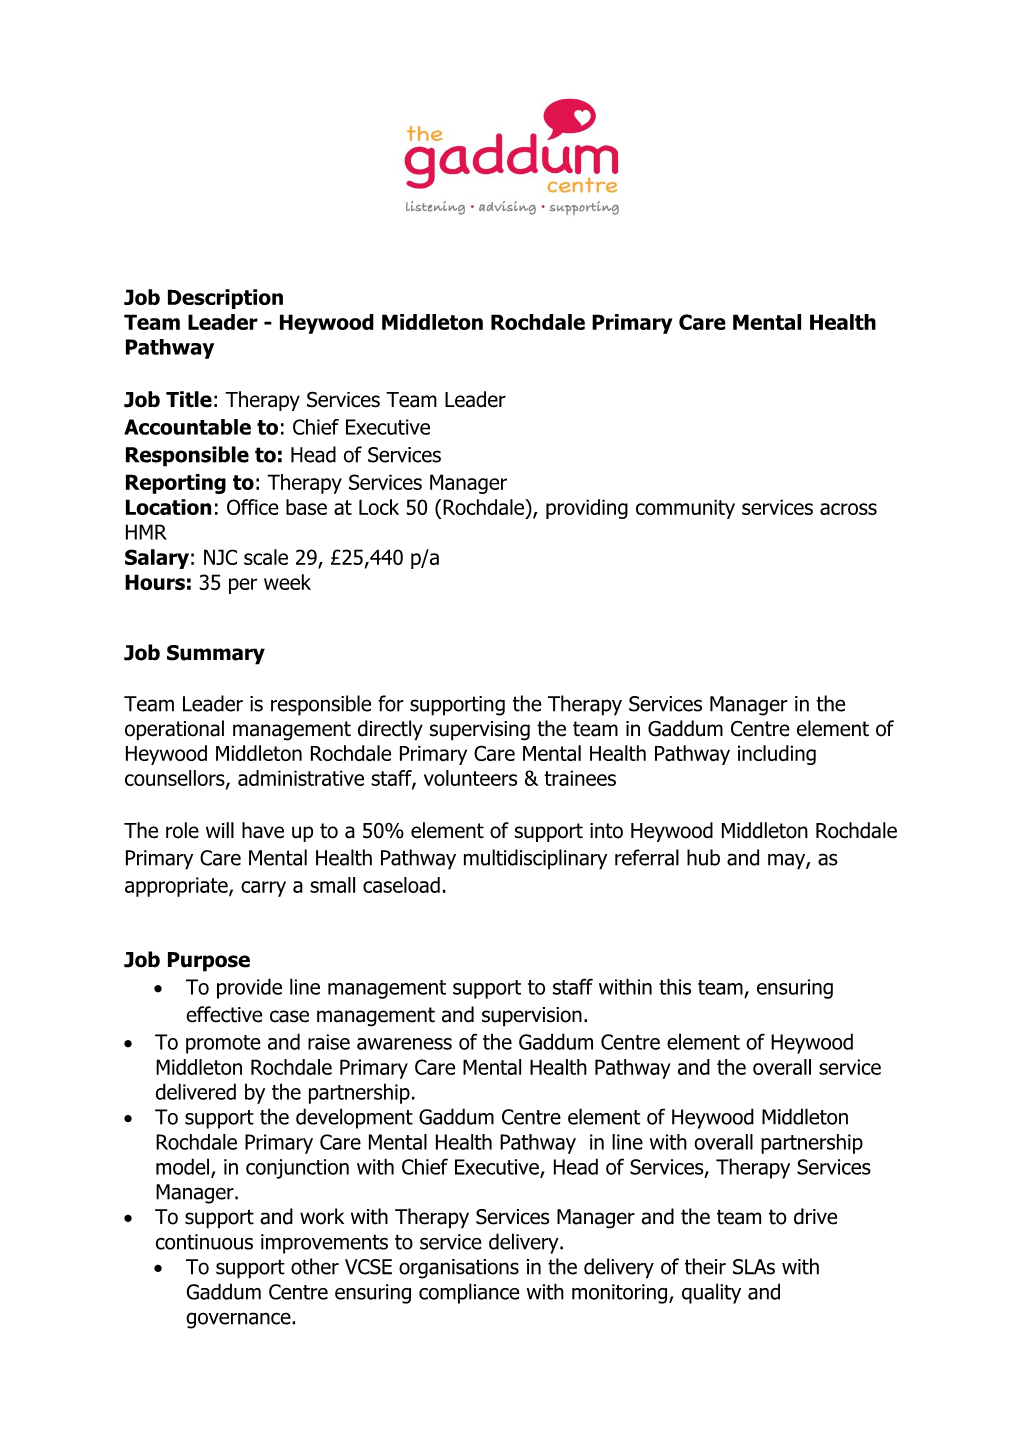 Team Leader - Heywood Middleton Rochdale Primary Care Mental Health Pathway